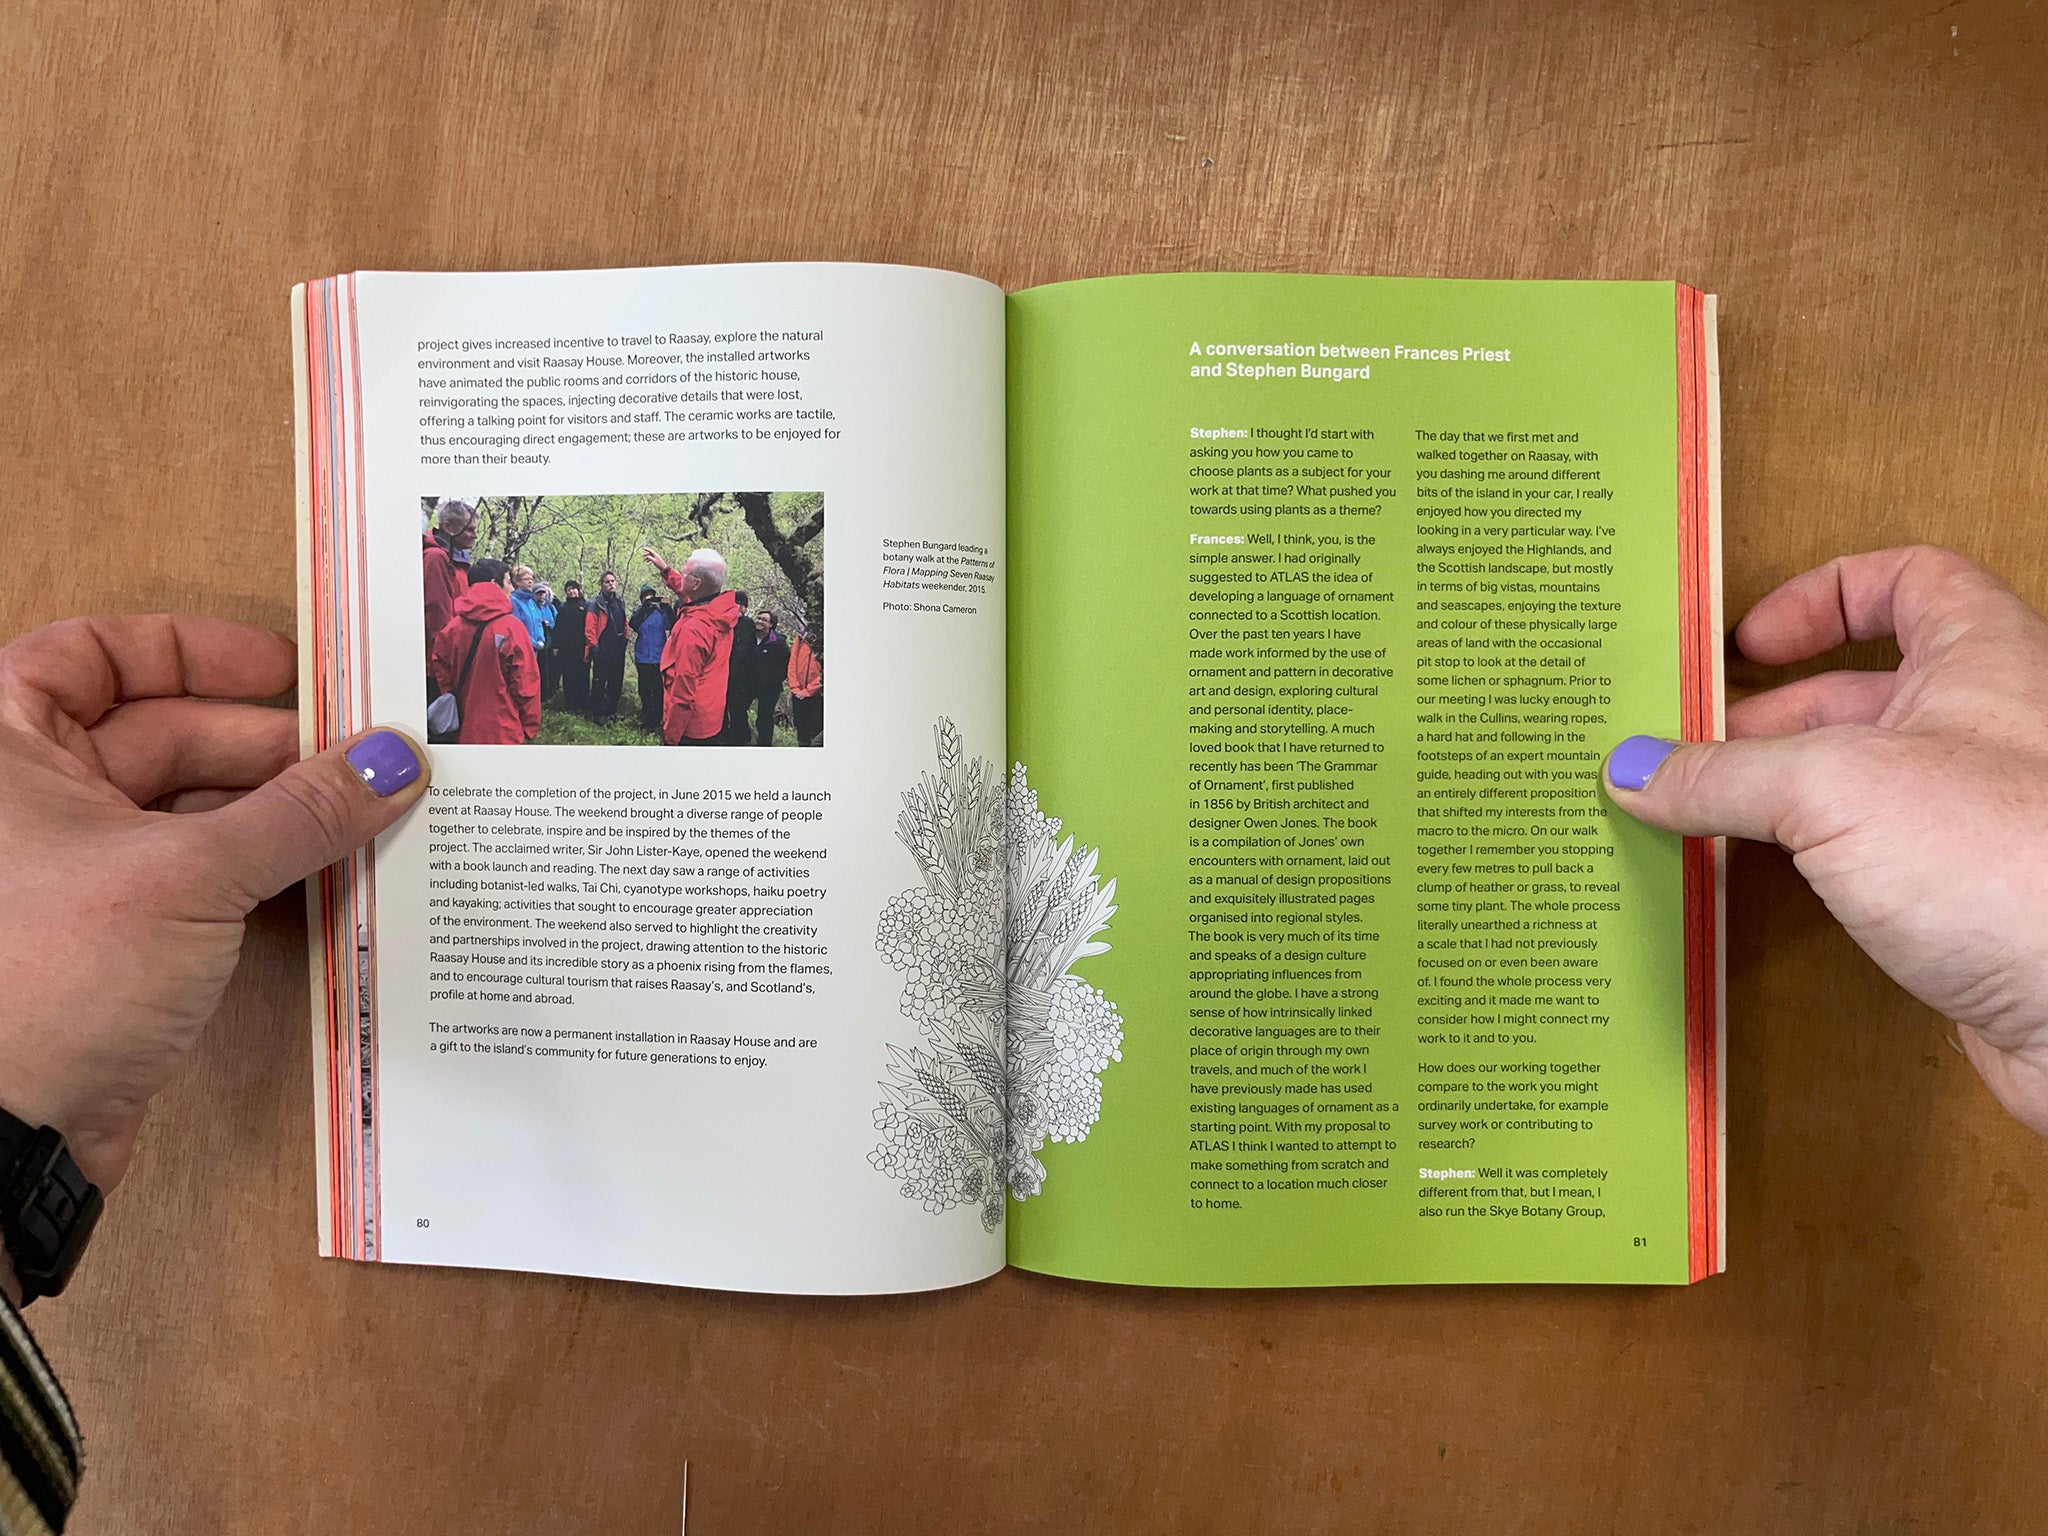 A COMMONPLACE BOOK OF ATLAS Edited by Emma Nicolson and Gayle Meikle